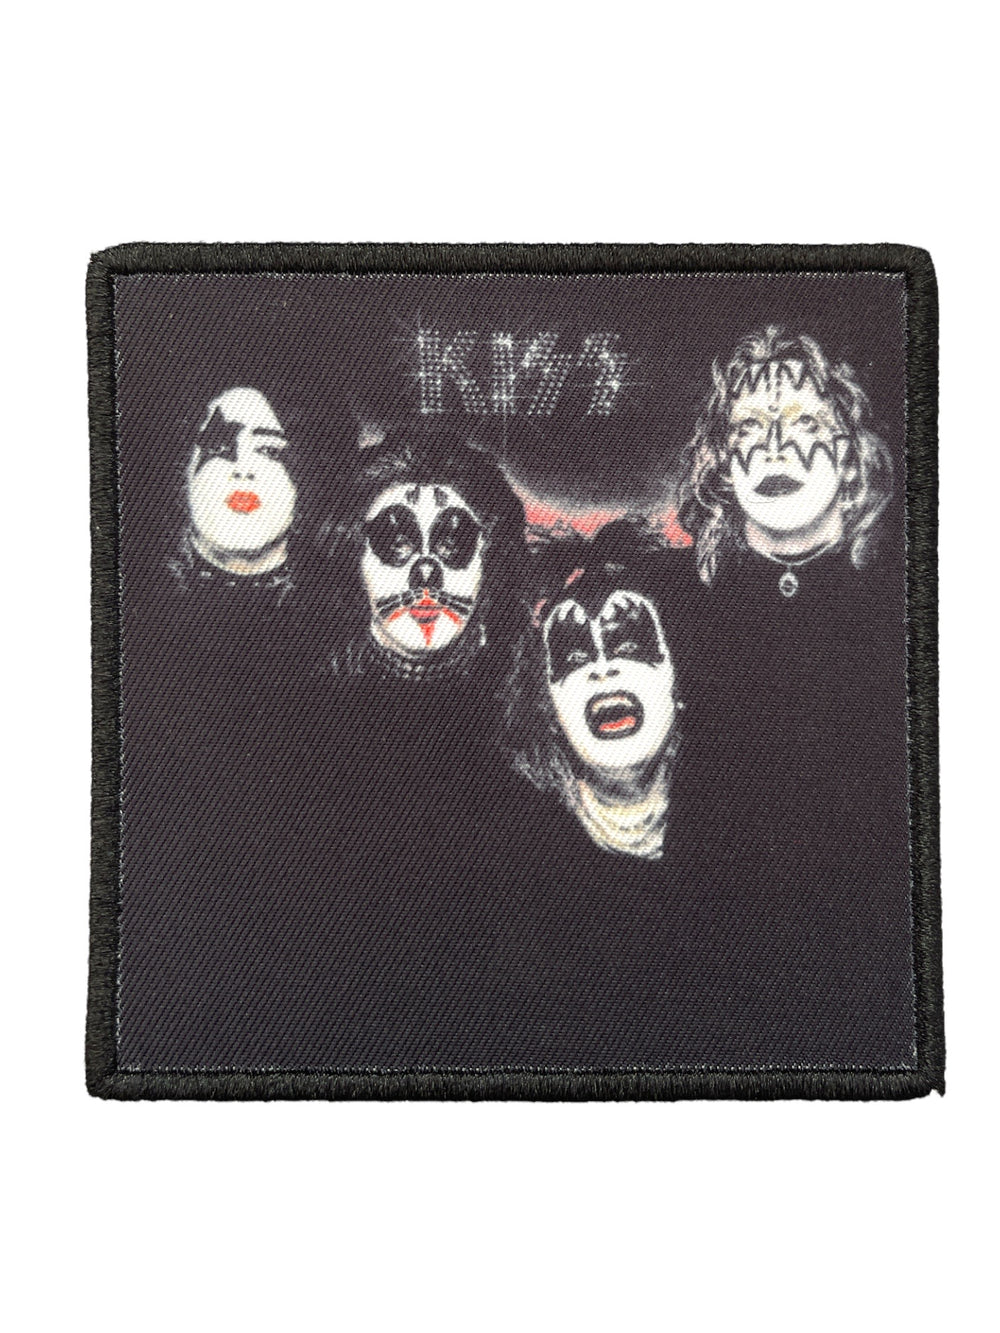 KISS First Album Cover Official Woven Patch Brand New